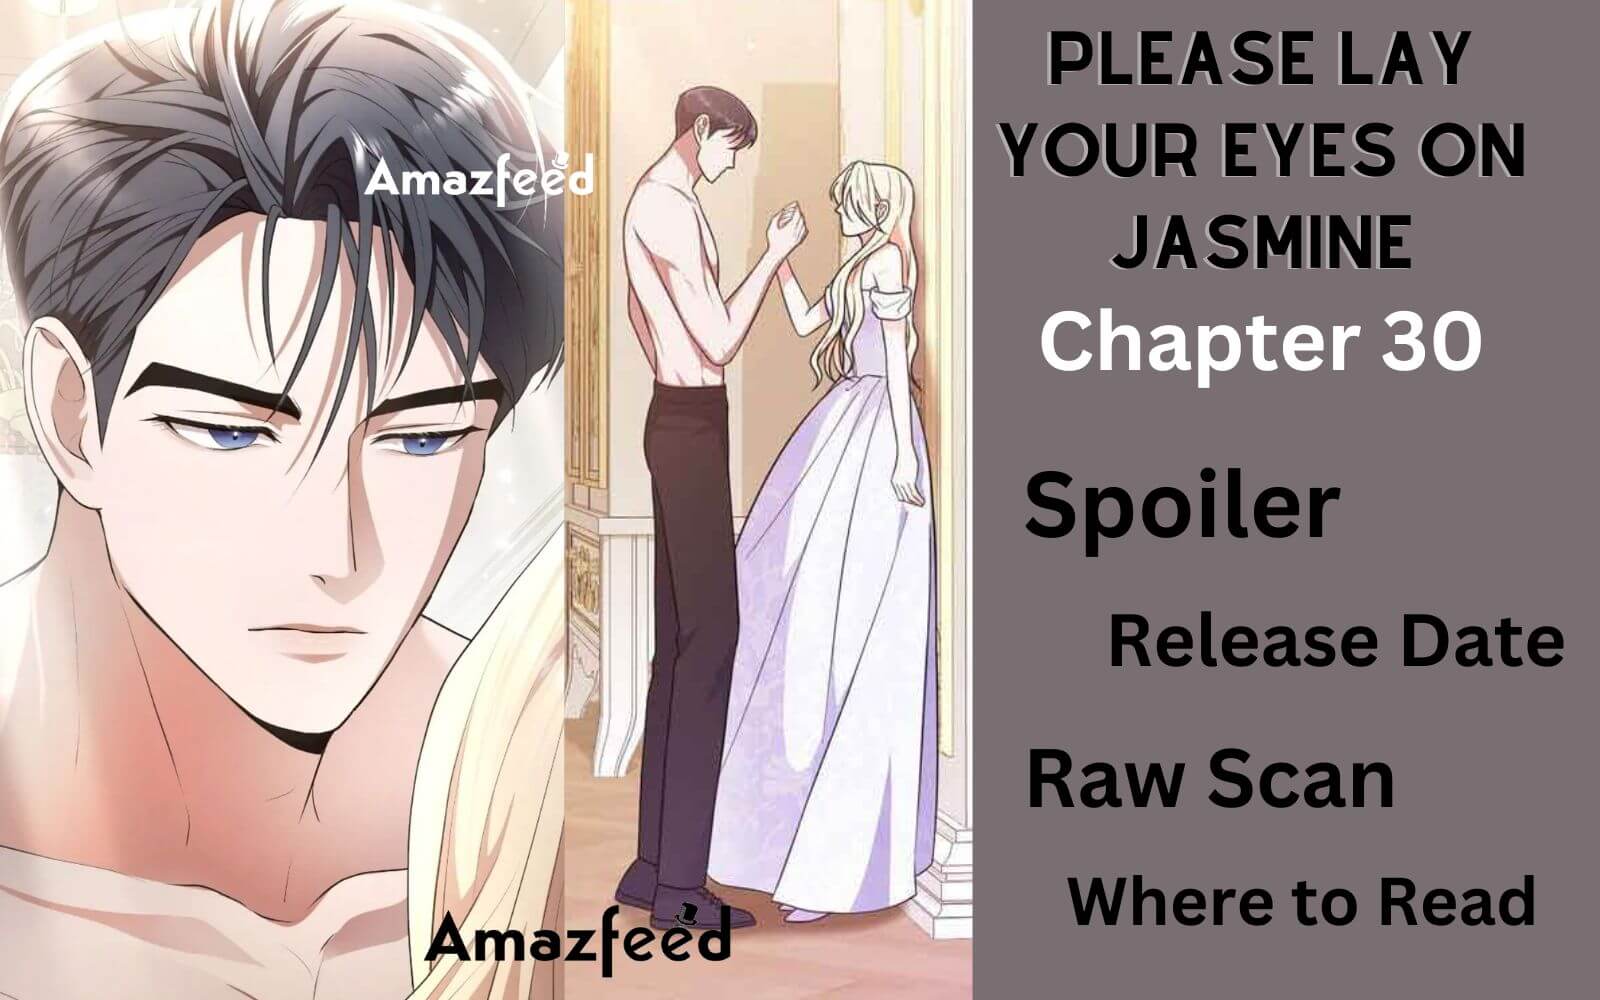 Dragon-Devouring Mage Chapter 35 Spoiler, Release Date, Recap & Where to  Read » Amazfeed